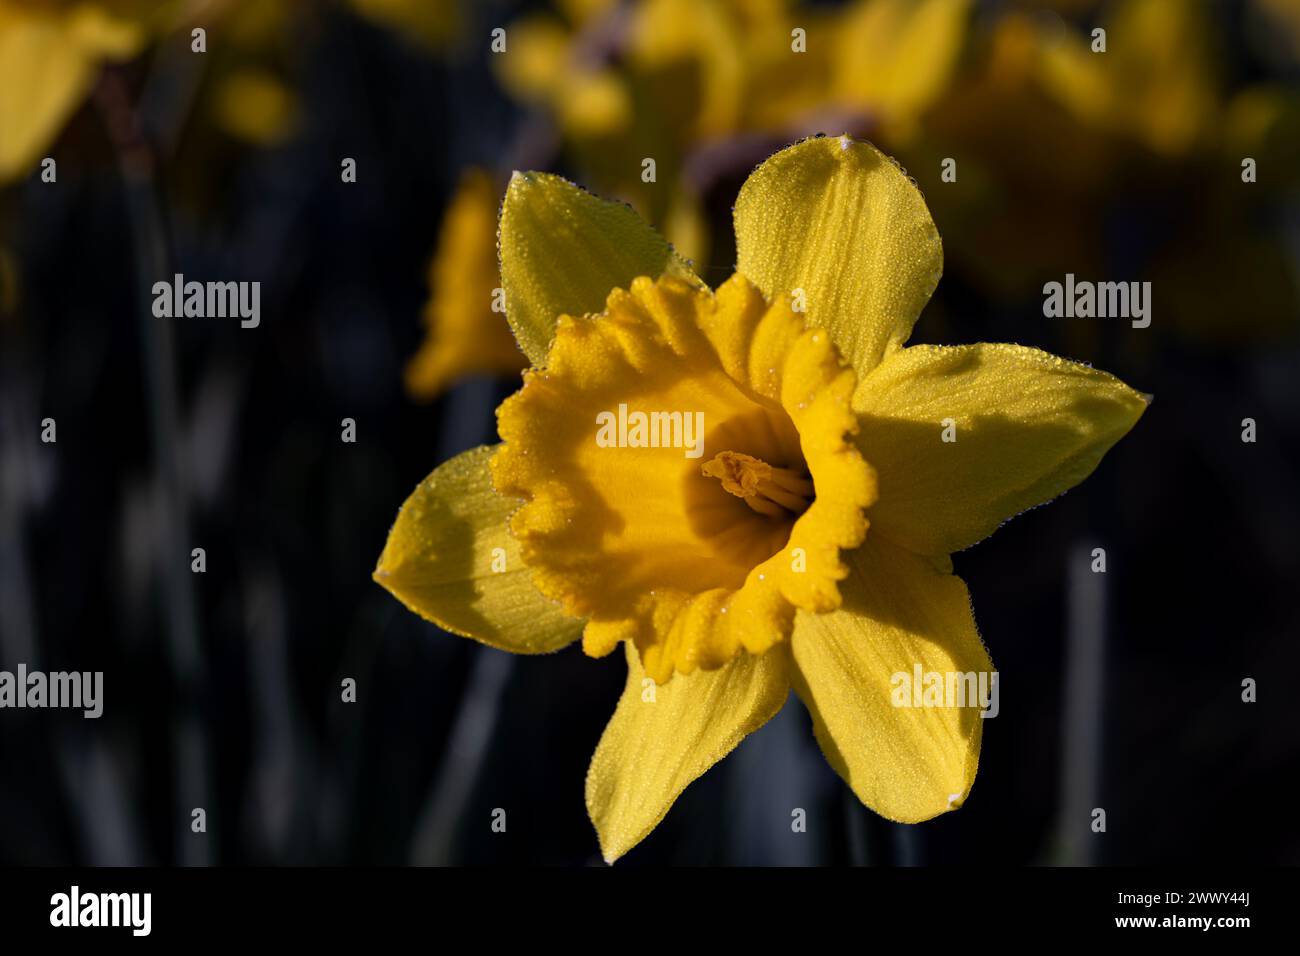 WA25133-00...WASHINGTON - A Yellow Trumpet daffodil growing in a commercial field in the Skagit Valley. Stock Photo